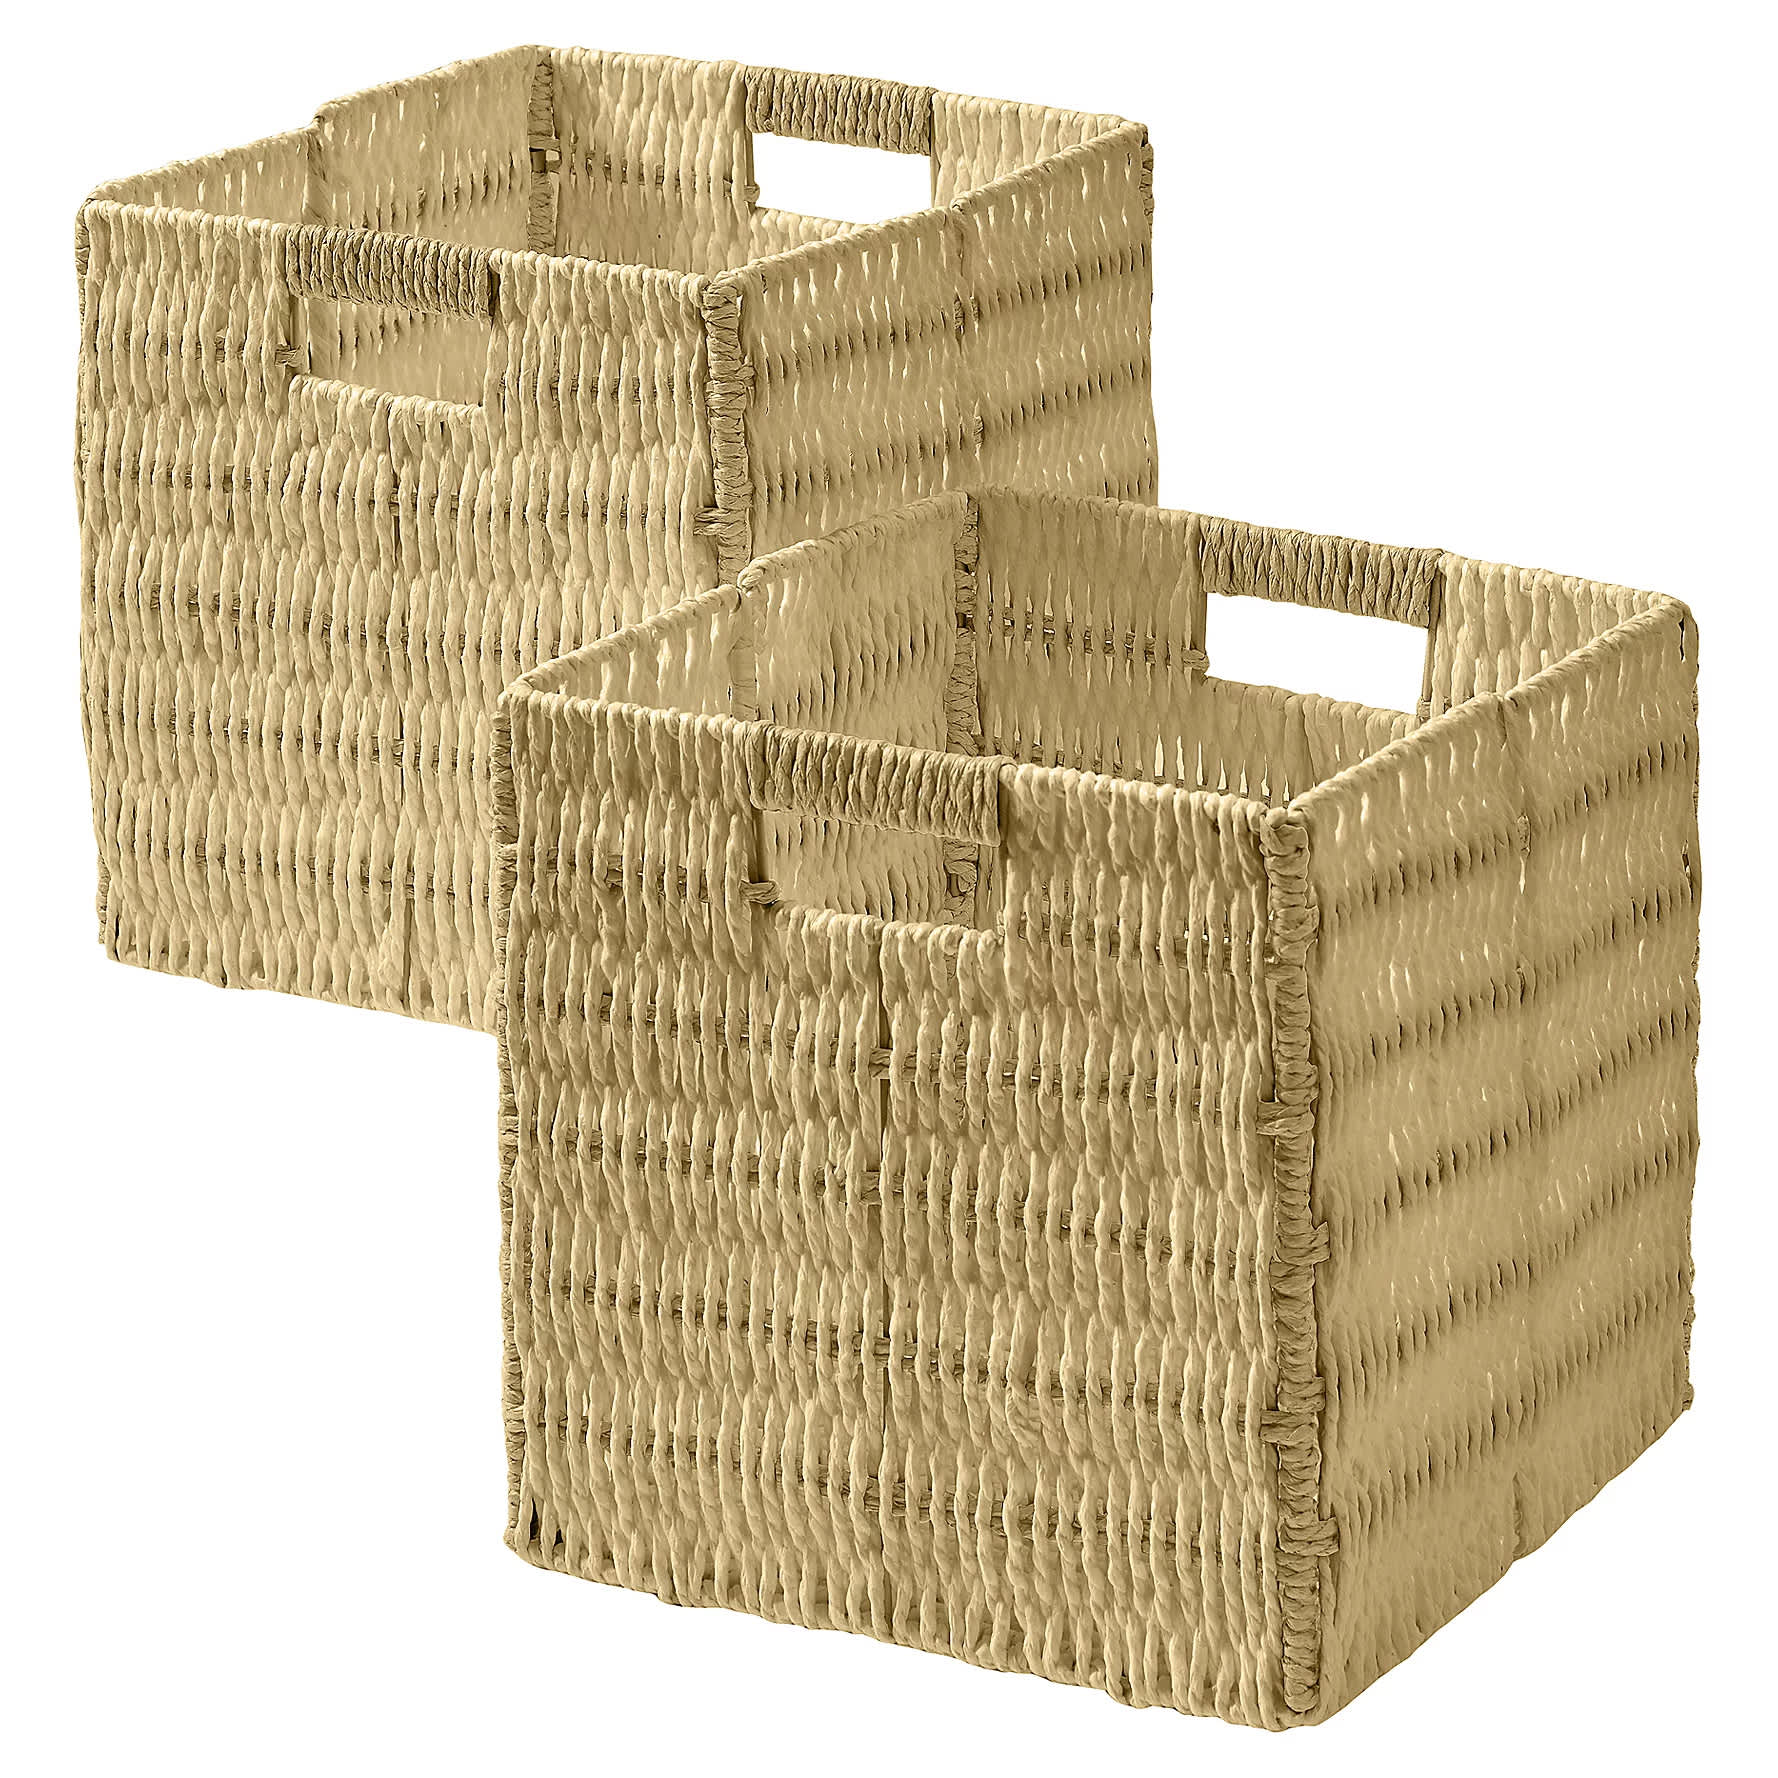 http://cdn.apartmenttherapy.info/image/upload/v1703011337/gen-workflow/product-database/ornavo-2-pack-wicket-storage-cube-qvc.jpg